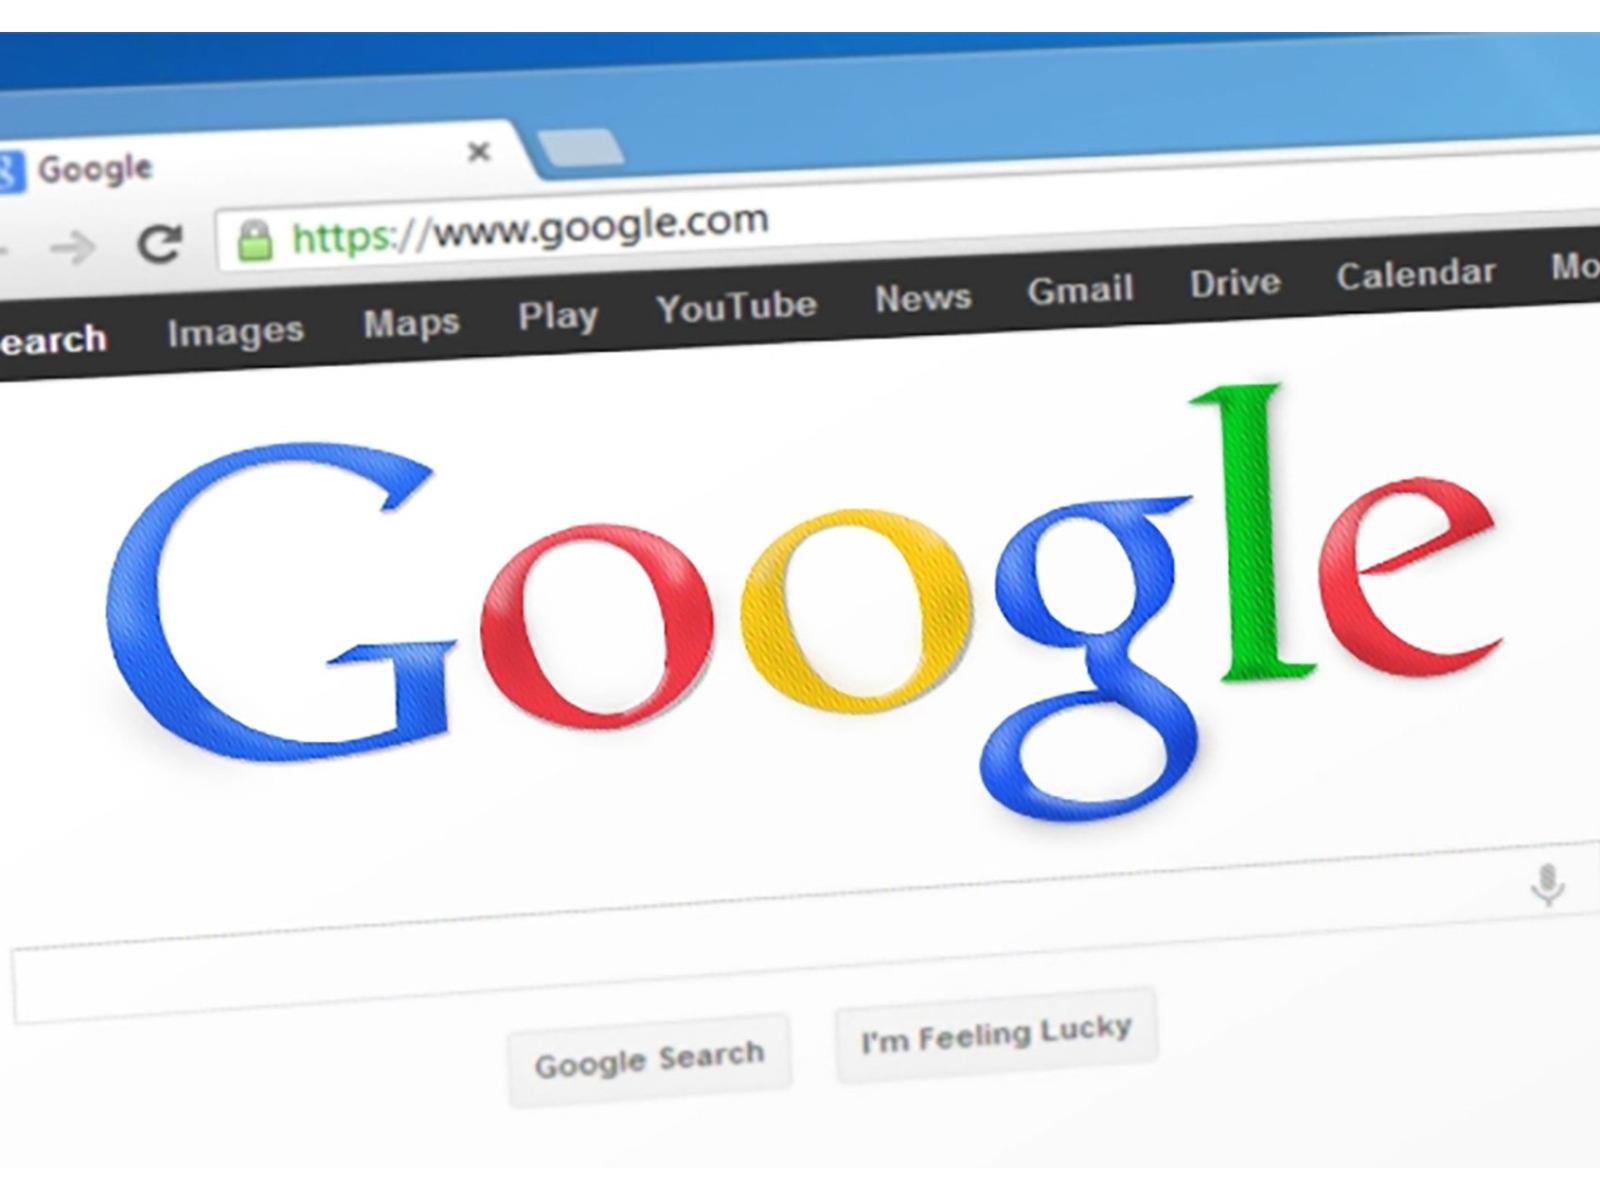 Here's How To Make Google Scrub Your Personal Data From Search Results